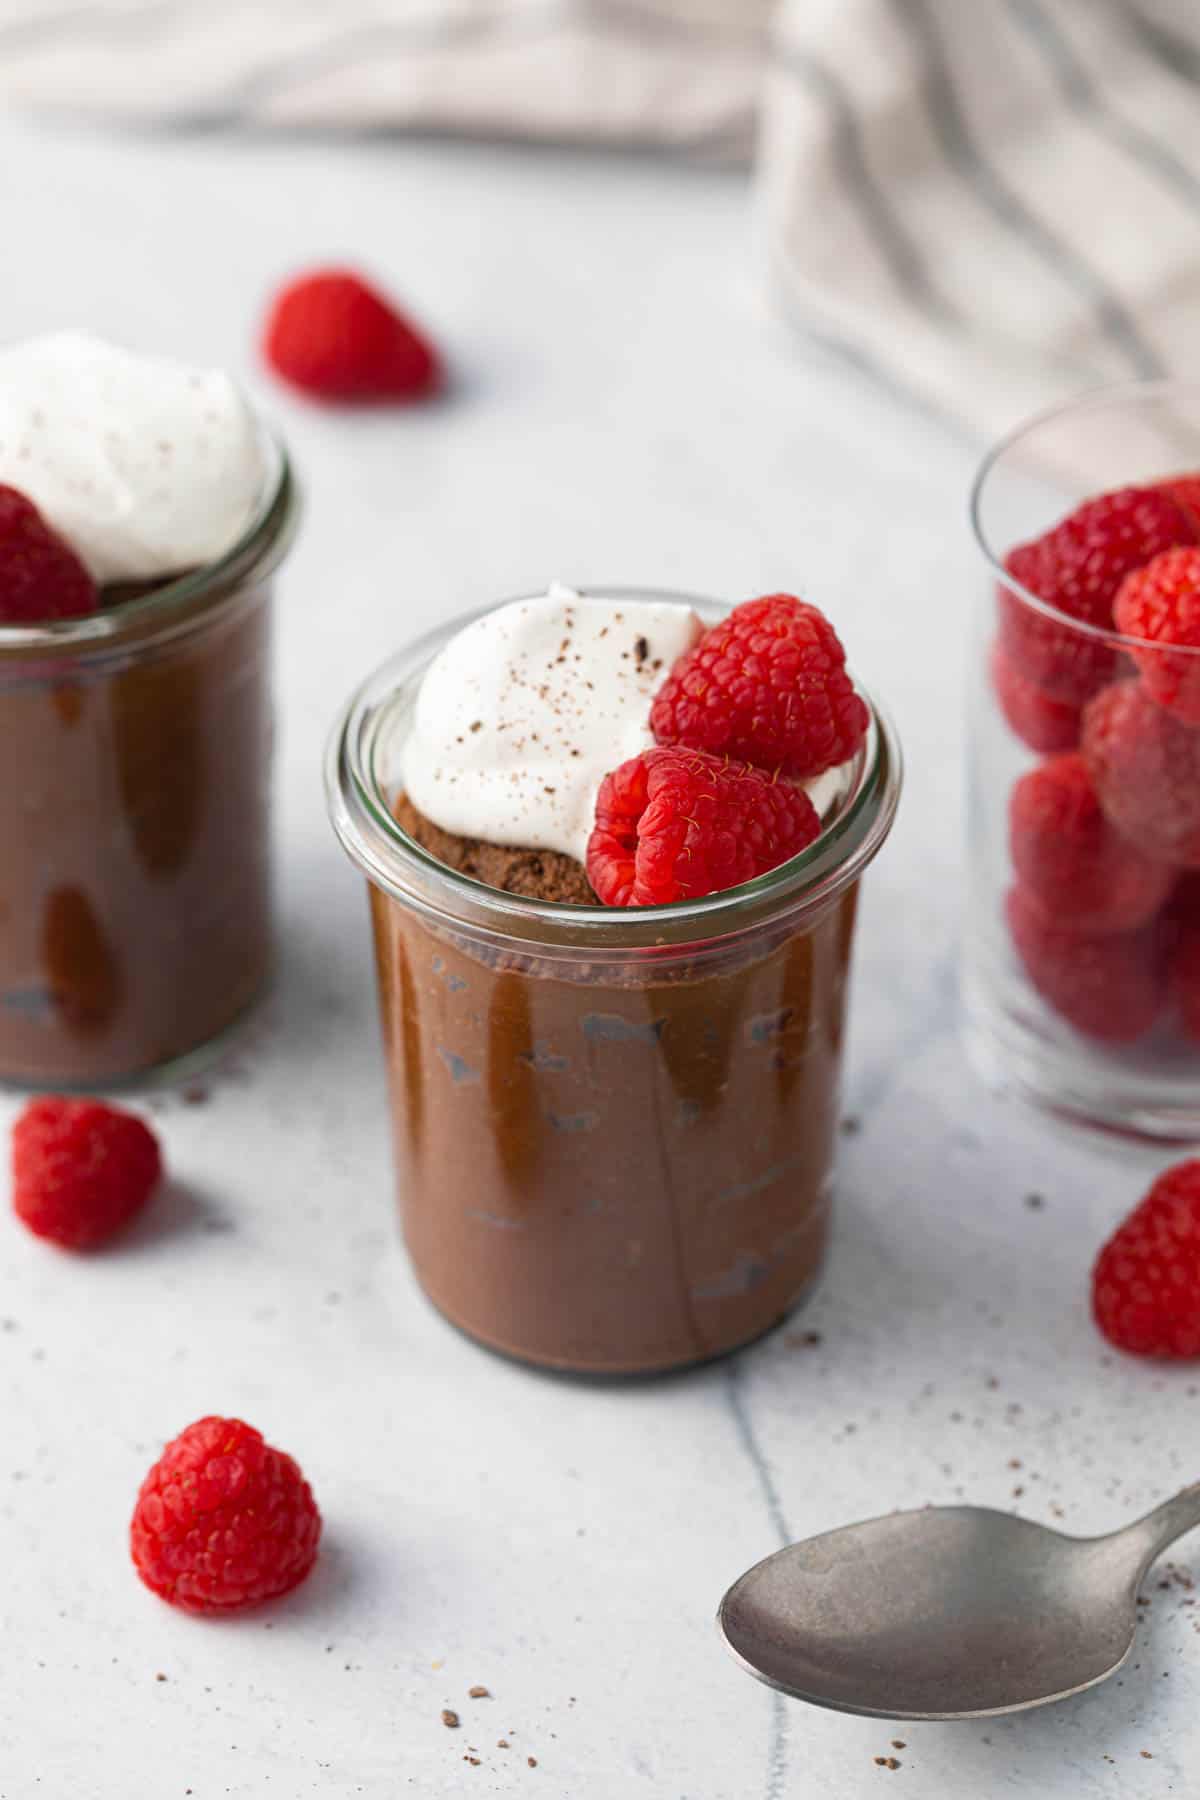 2 small jars of chocolate avocado mouse with whipped cream and raspberries with a closer shot on the center jar, and a small glass jar on the other side filled with fresh raspberries. A spoon and more fresh berries scattered around.